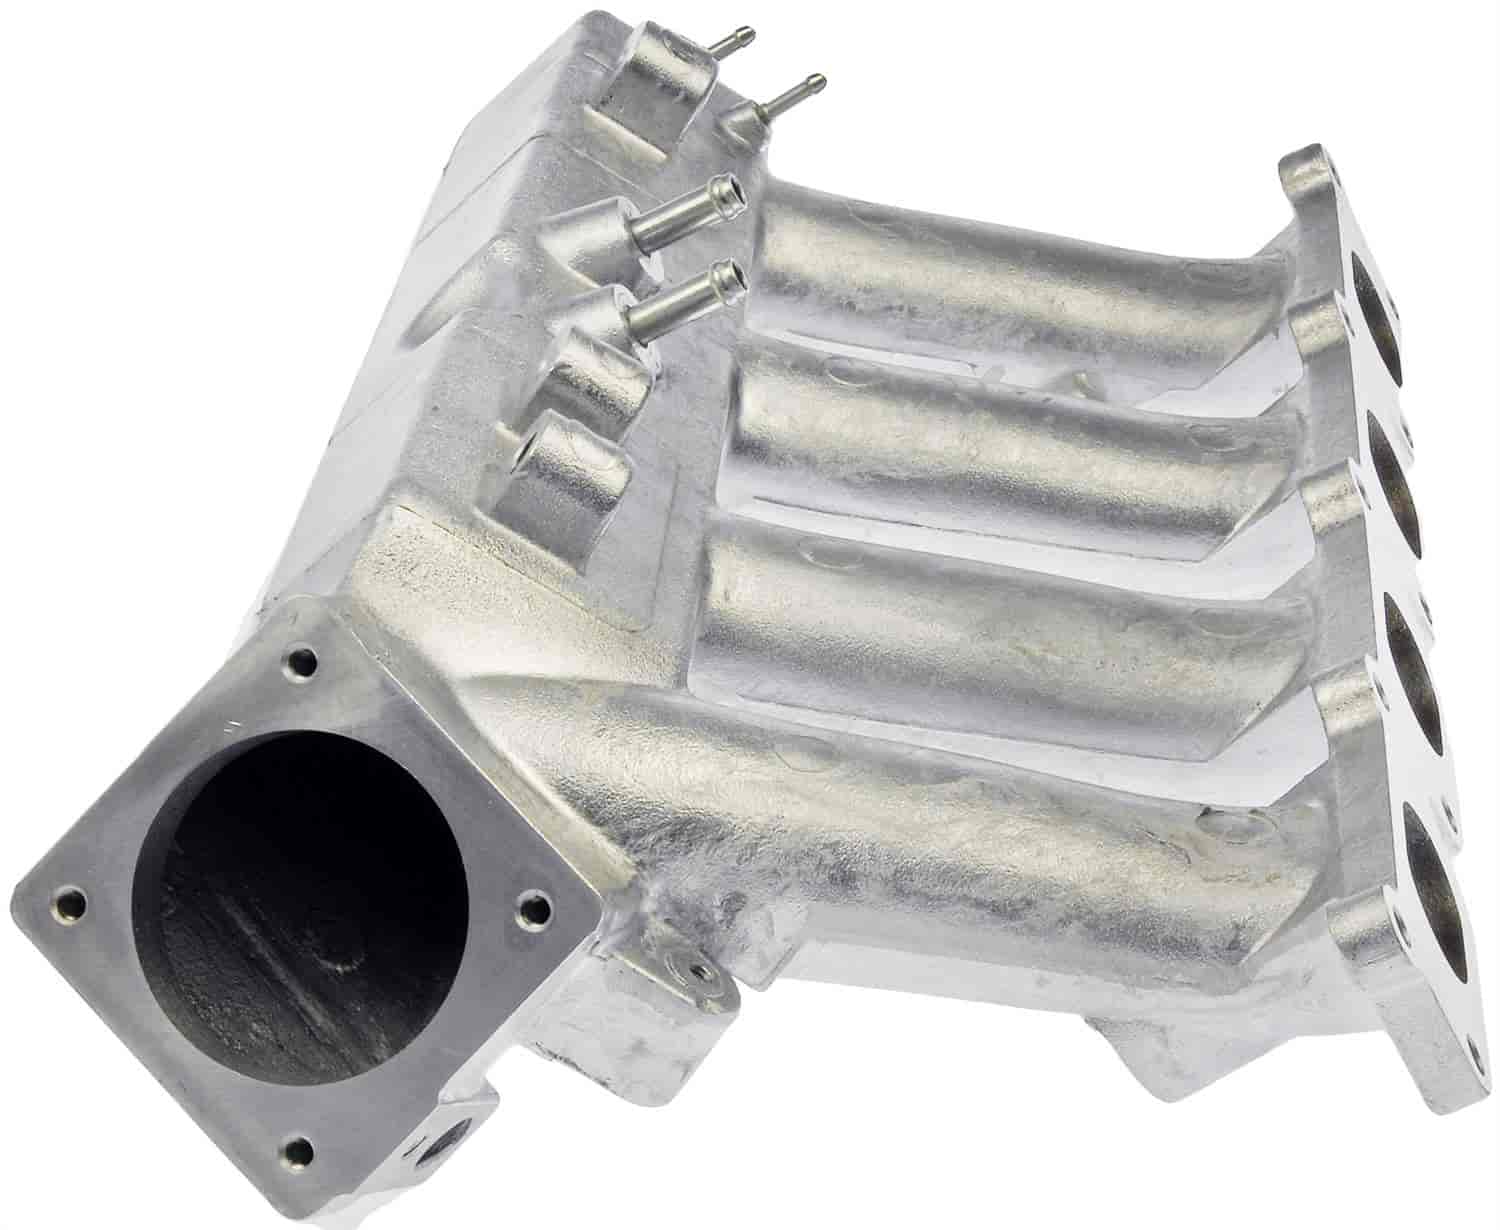 Intake Manifold Upper-Aluminum-Includes Gaskets